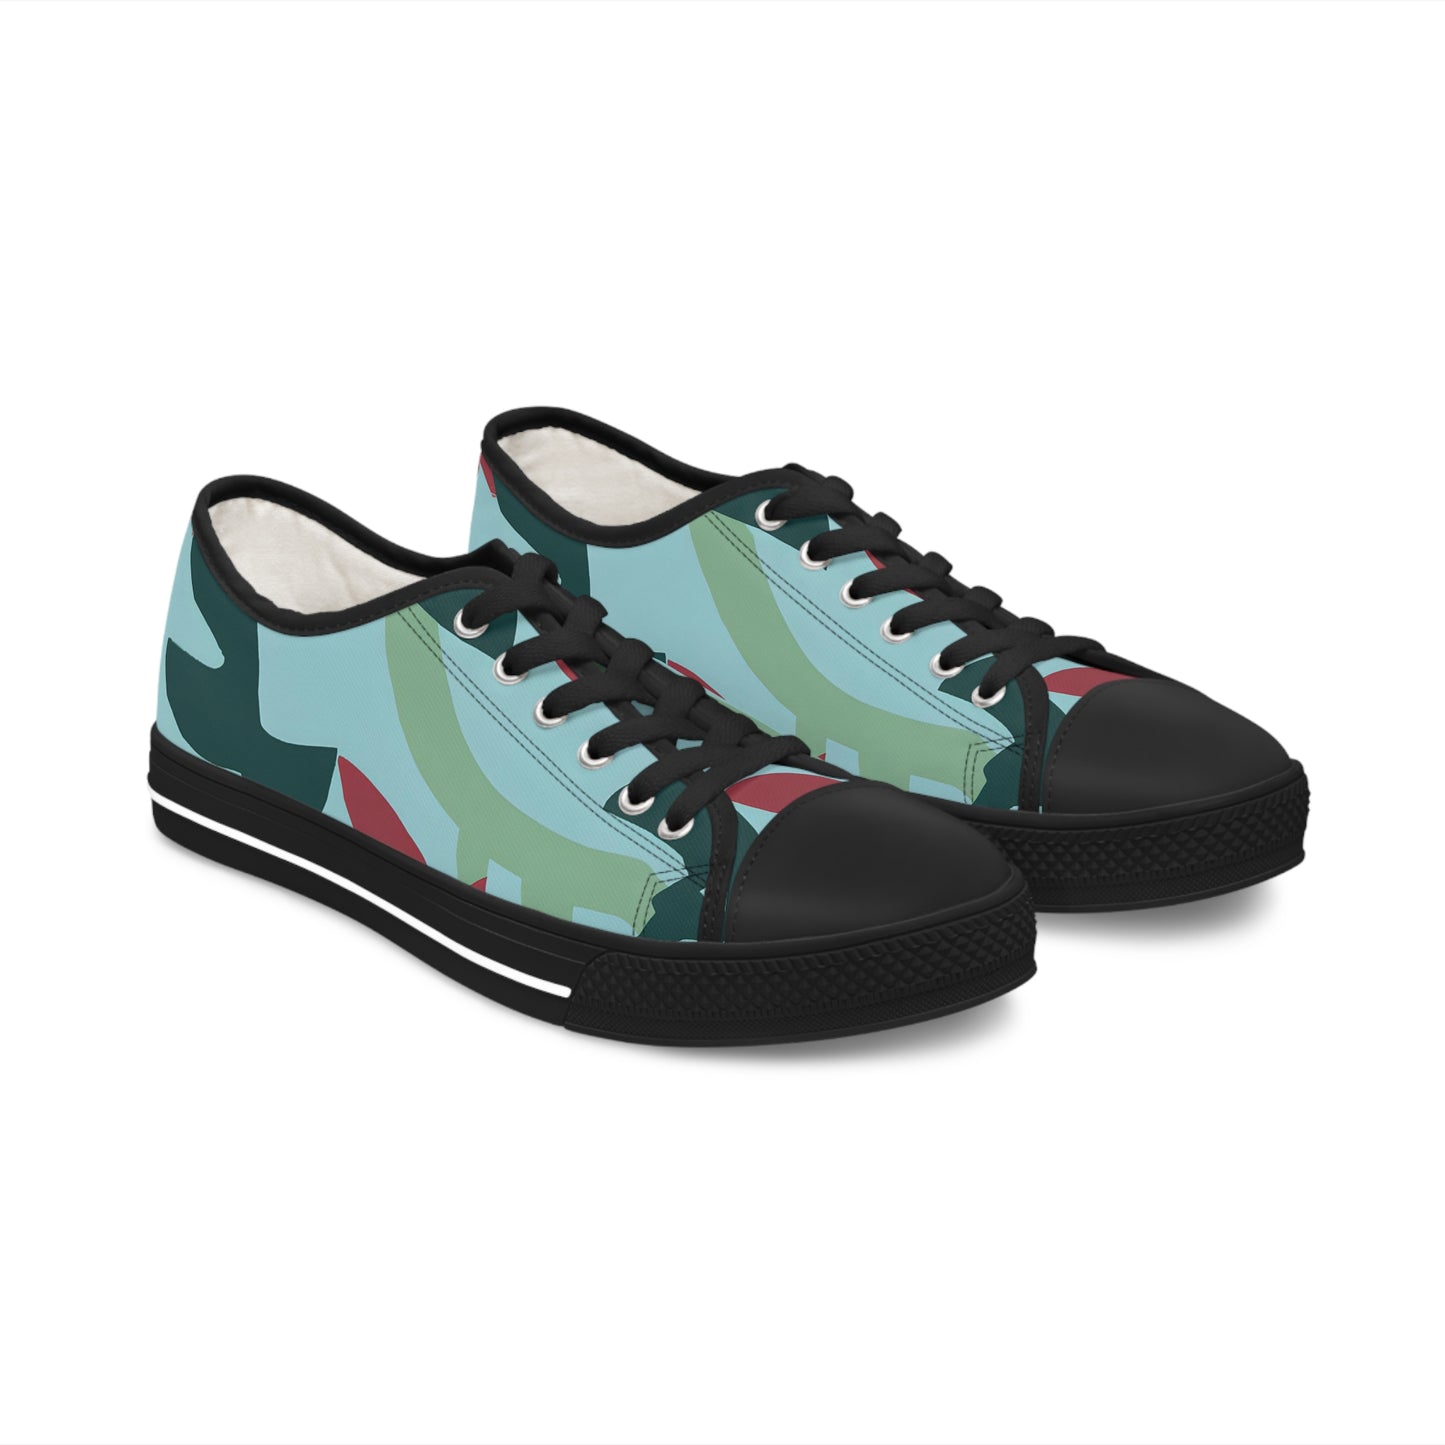 Chaparral Ione - Women's Low-Top Sneakers